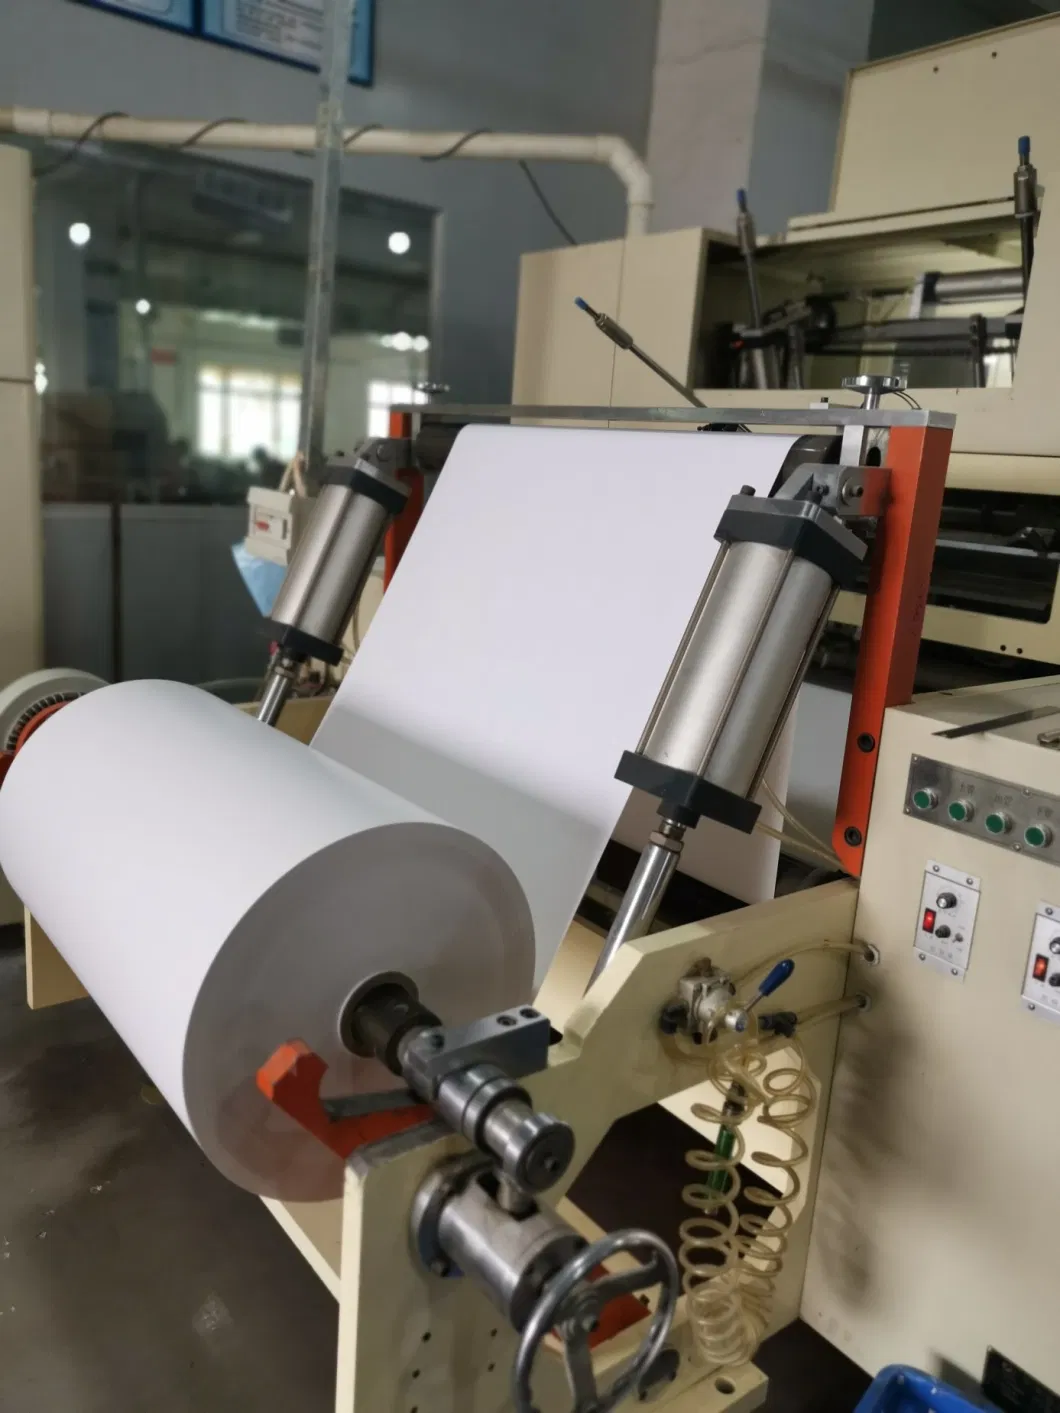 Thermal Paper in Small Rolls Used as Receipts in Banks, Shops Restaurant, Transportation